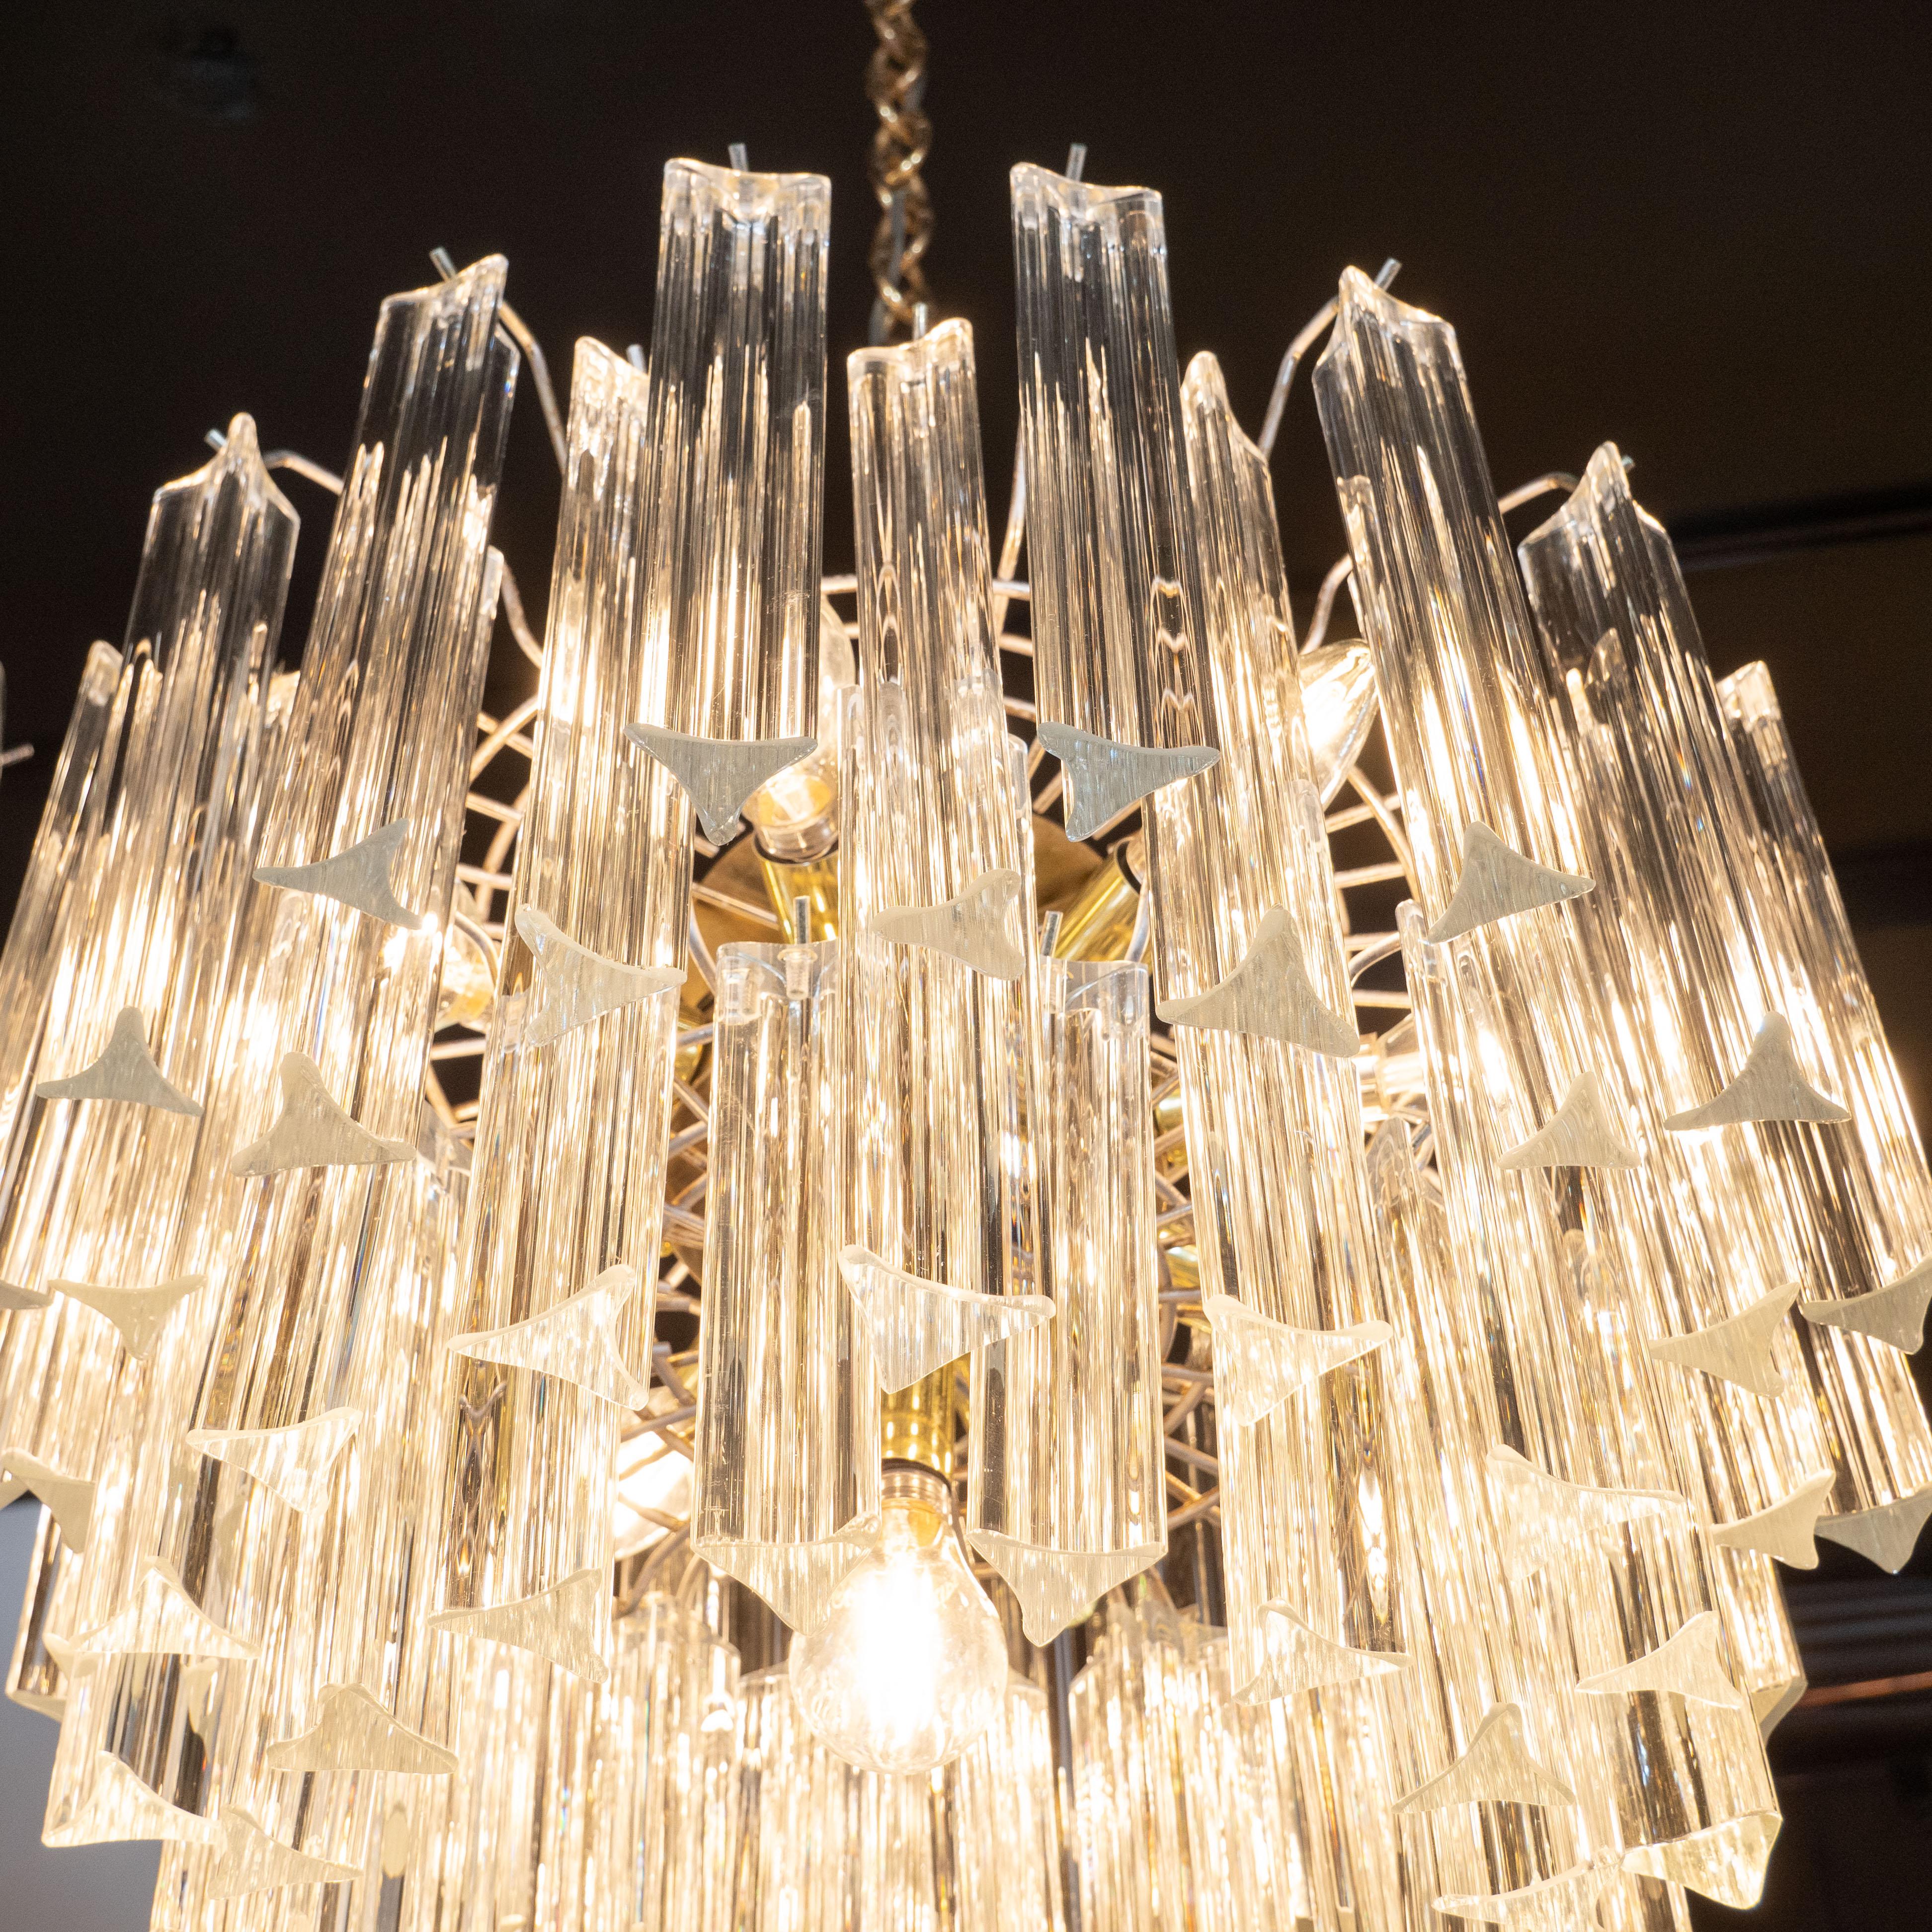 Murano Glass Mid-Century Modern Four-Tier Handblown Camer Chandelier with Brass Fittings